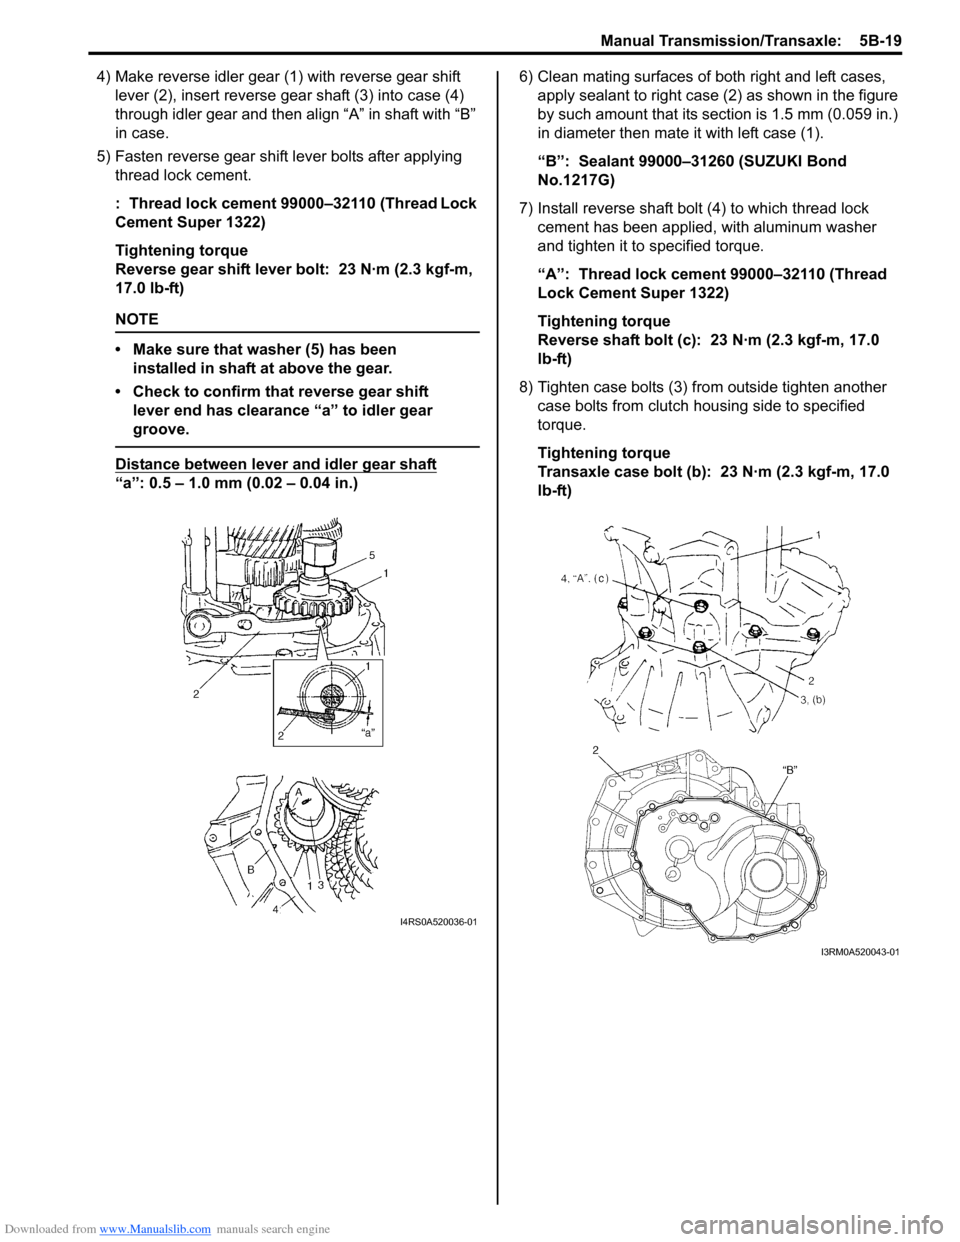 SUZUKI SWIFT 2006 2.G Service Owners Manual Downloaded from www.Manualslib.com manuals search engine Manual Transmission/Transaxle:  5B-19
4) Make reverse idler gear (1) with reverse gear shift lever (2), insert reverse gear shaft (3) into case